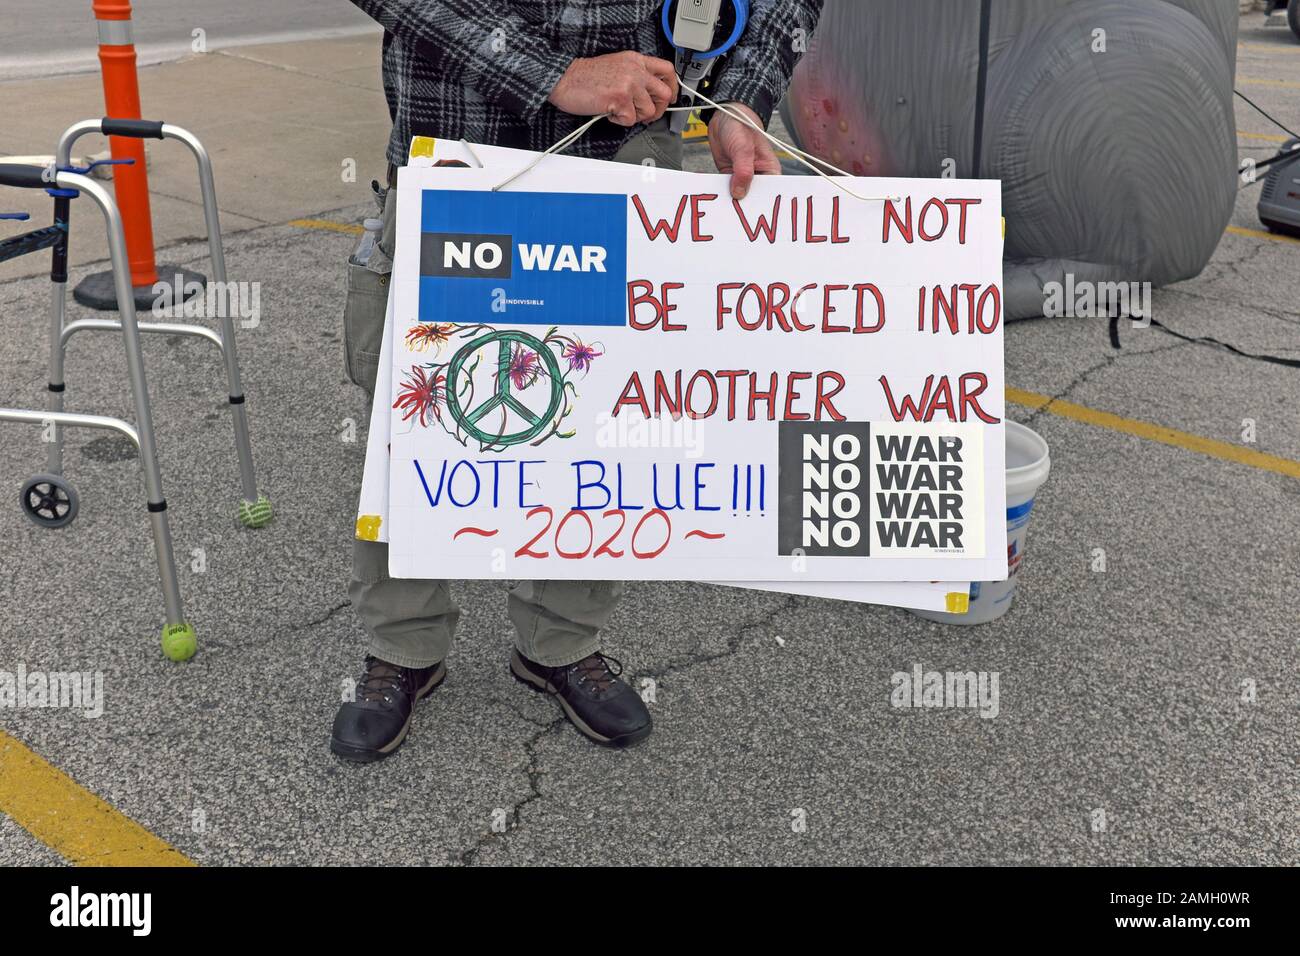 An anti-GOP street protester holds a 'No War' sign in response to the attack in Iran.  'We will not be forced into another war vote Blue 2020' Stock Photo